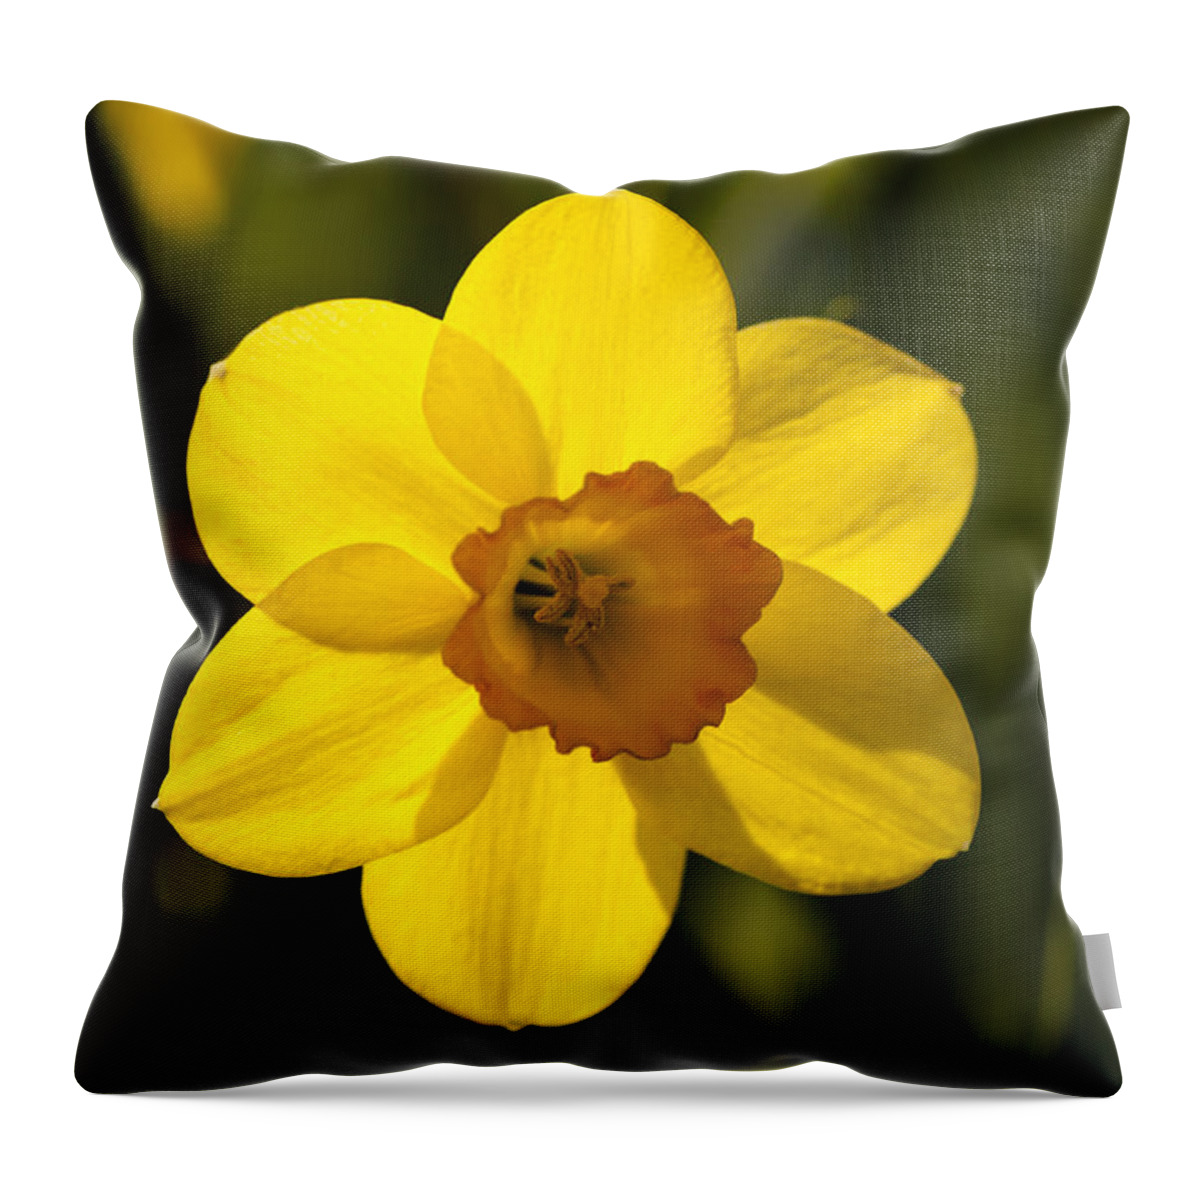  Throw Pillow featuring the photograph Projecting the Sun by Dan Hefle